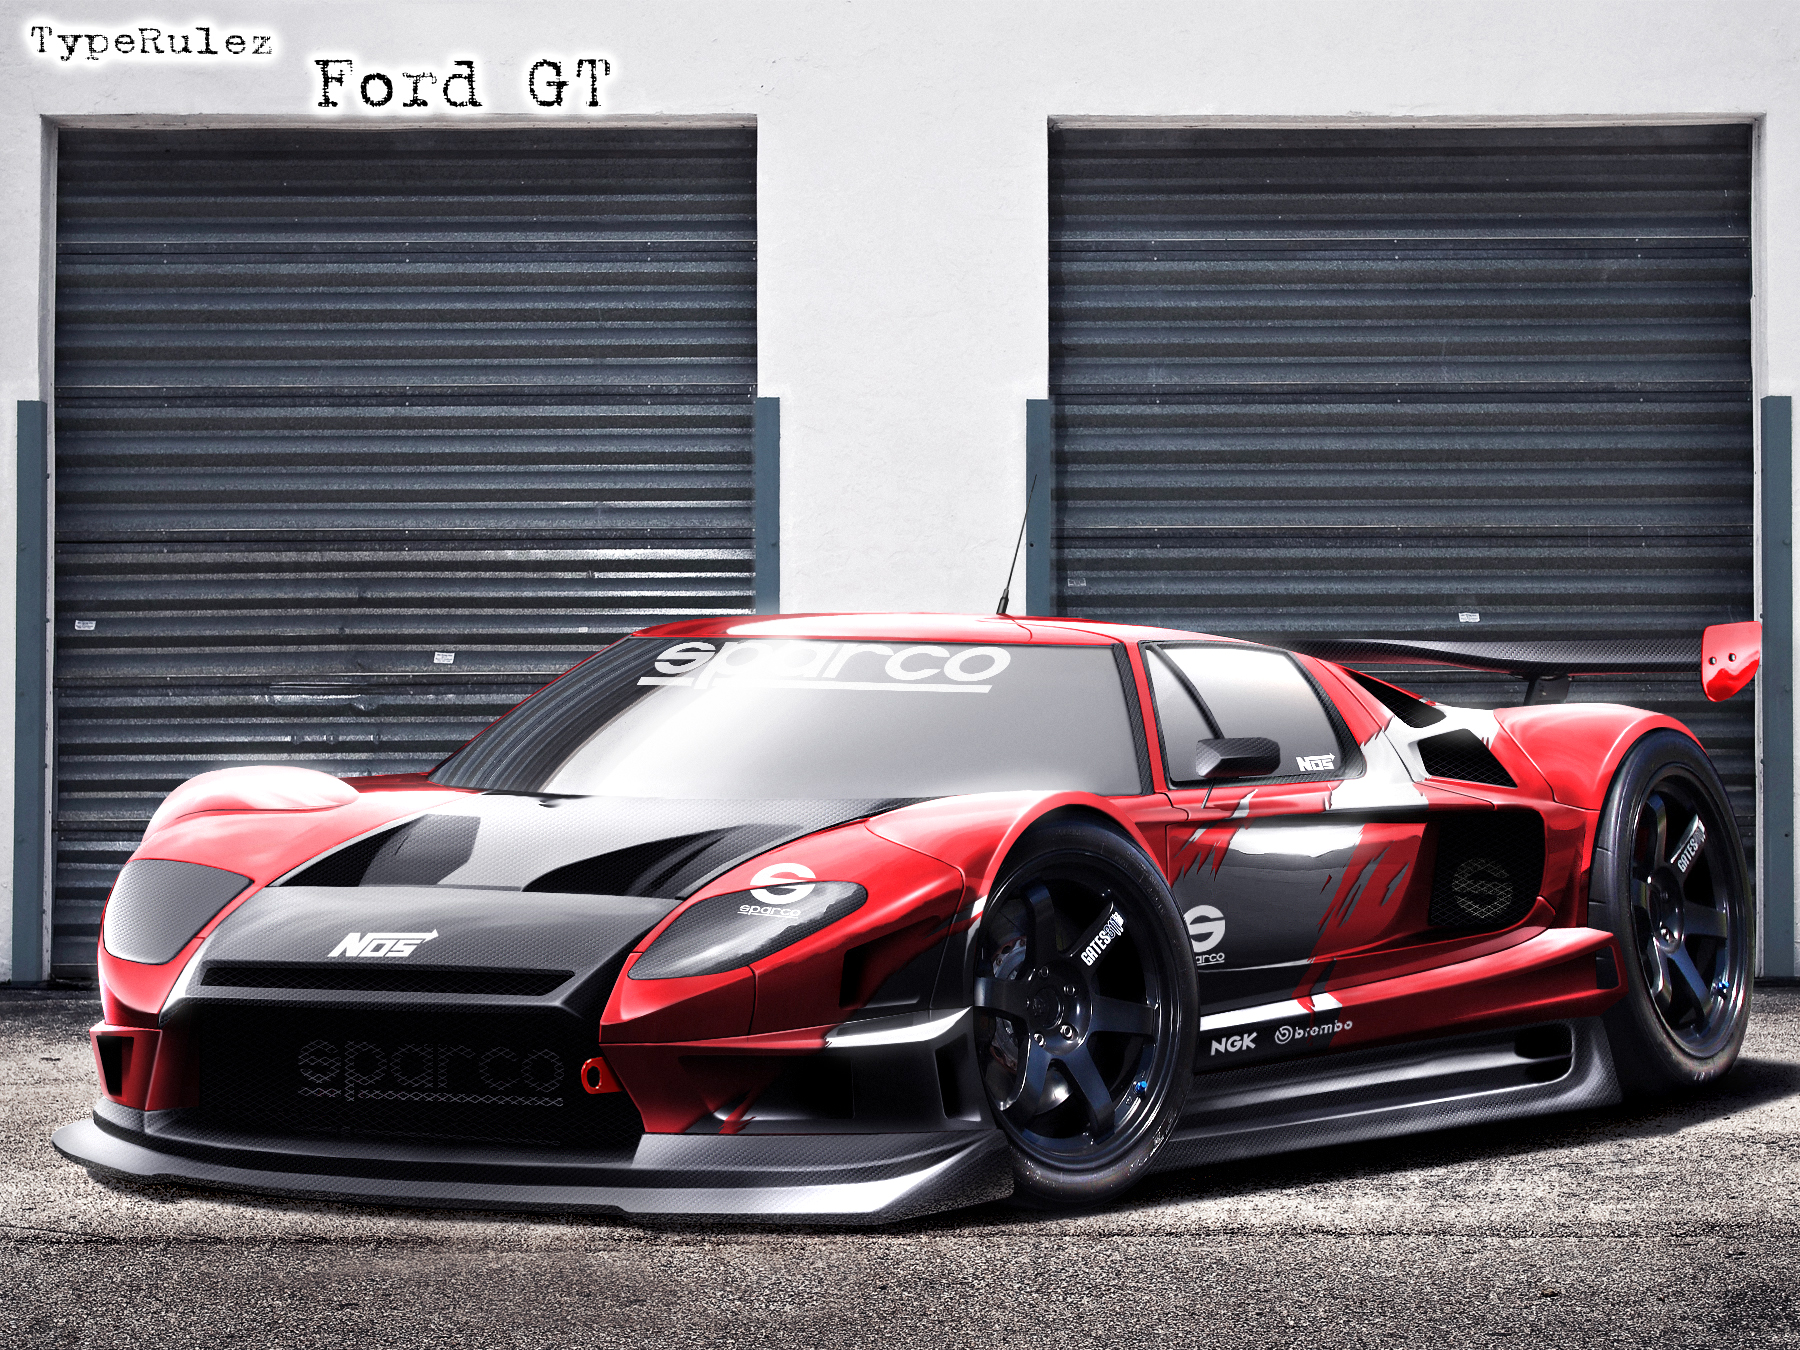 Ford Gt Track Hd Wallpaper Galerie Wallpapers For All - Free ...